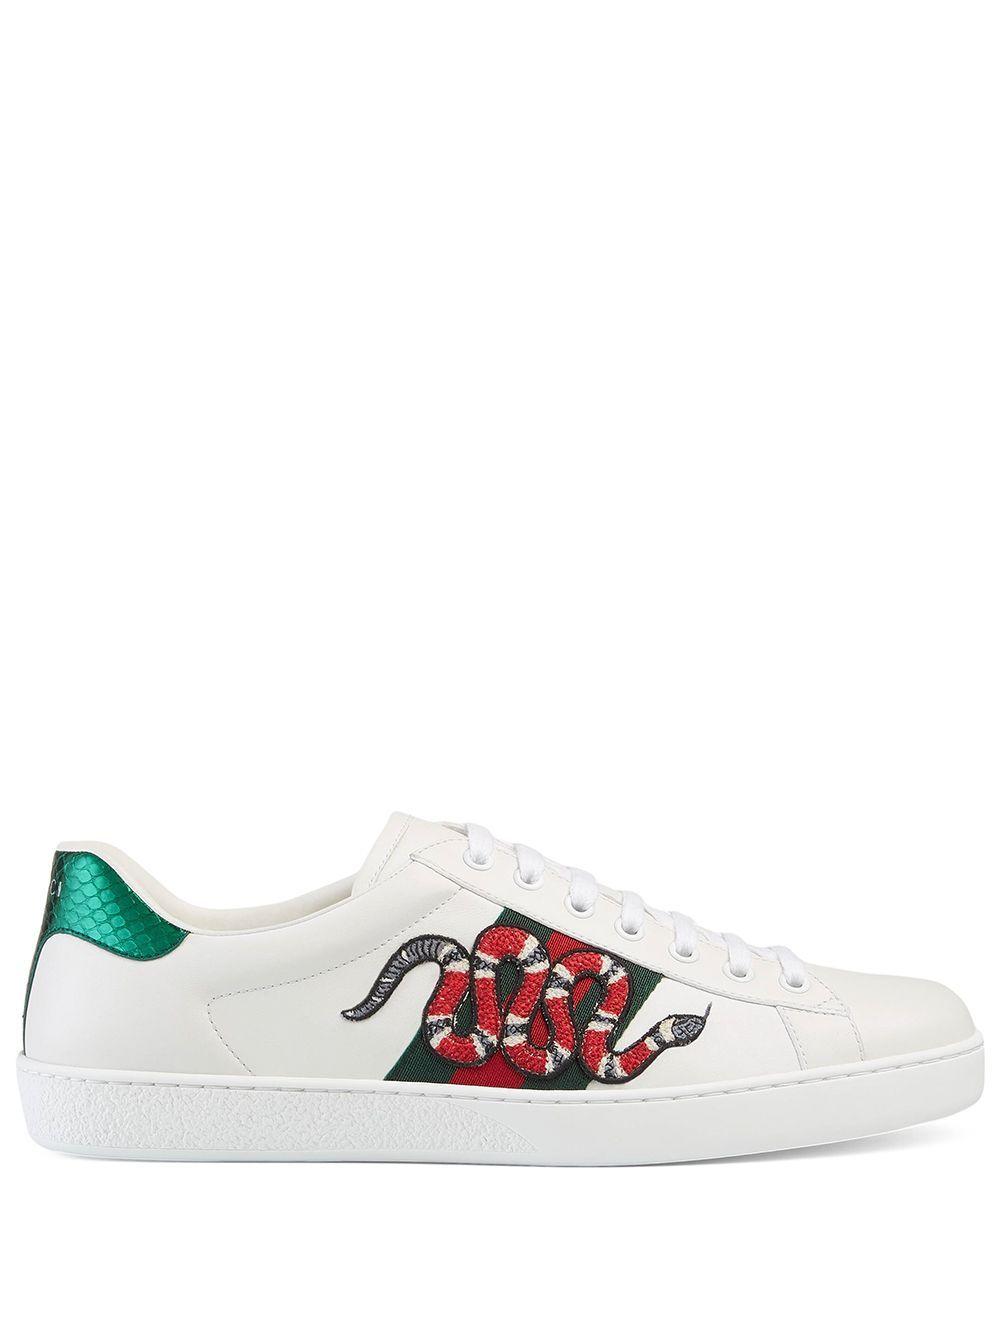 Gucci Leather Ace Embroidered Sneaker in White for Men - Save 45% - Lyst